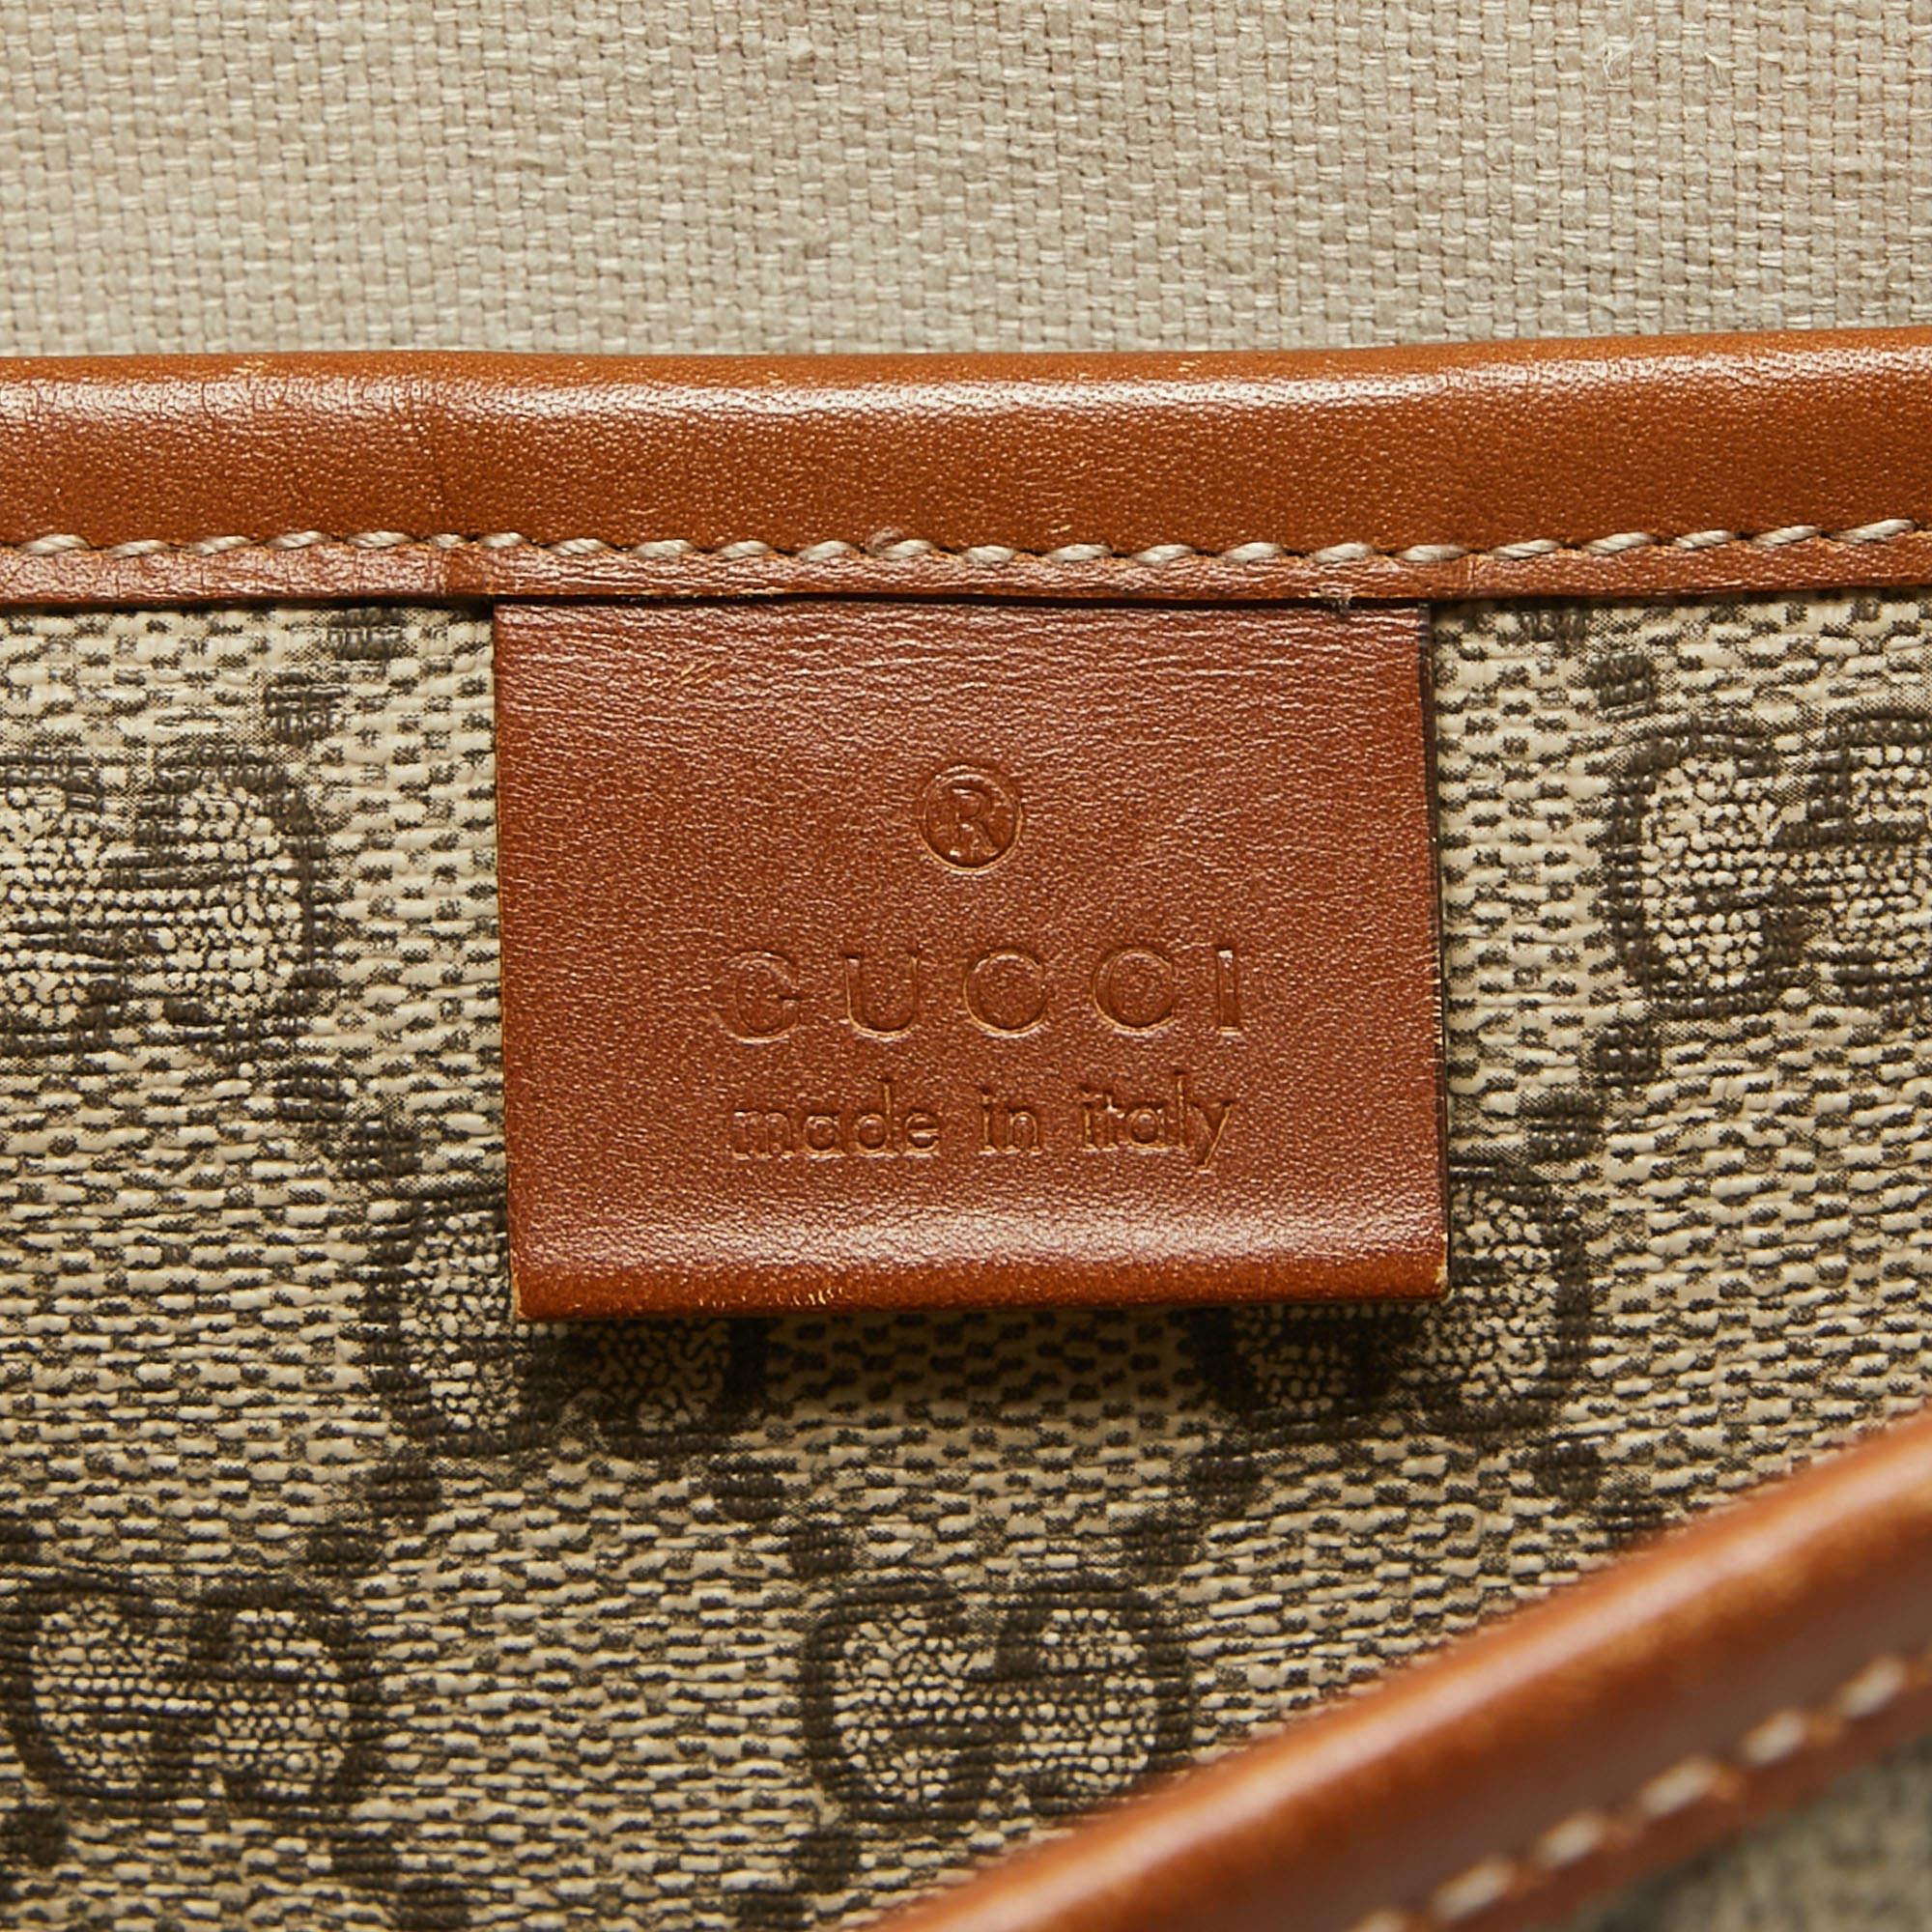 Gucci Beige/Brown GG Supreme Canvas And Leather Messenger Bag 24